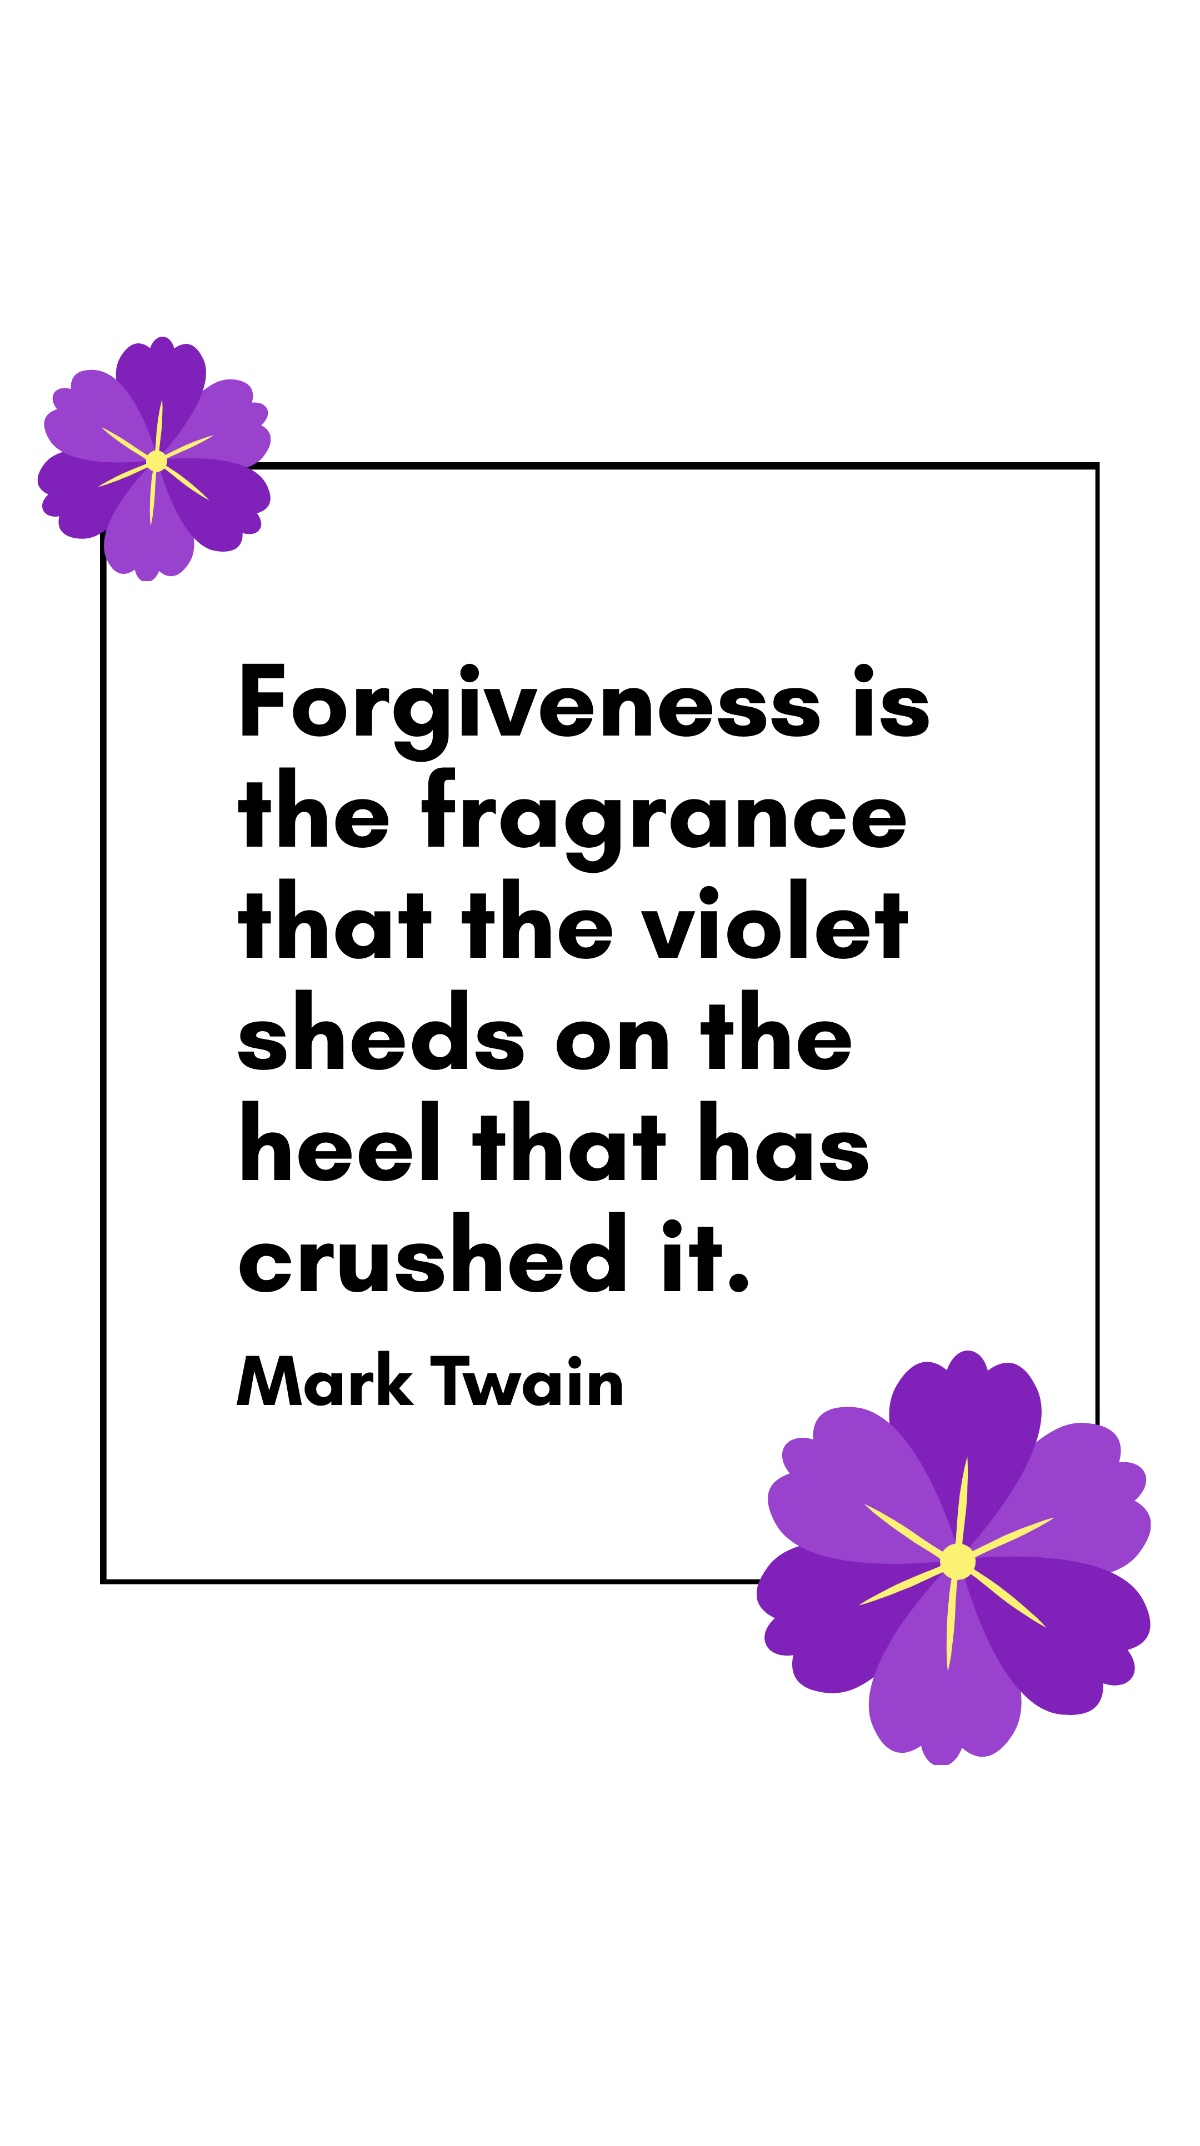 Mark Twain - Forgiveness is the fragrance that the violet sheds on the heel that has crushed it. Template